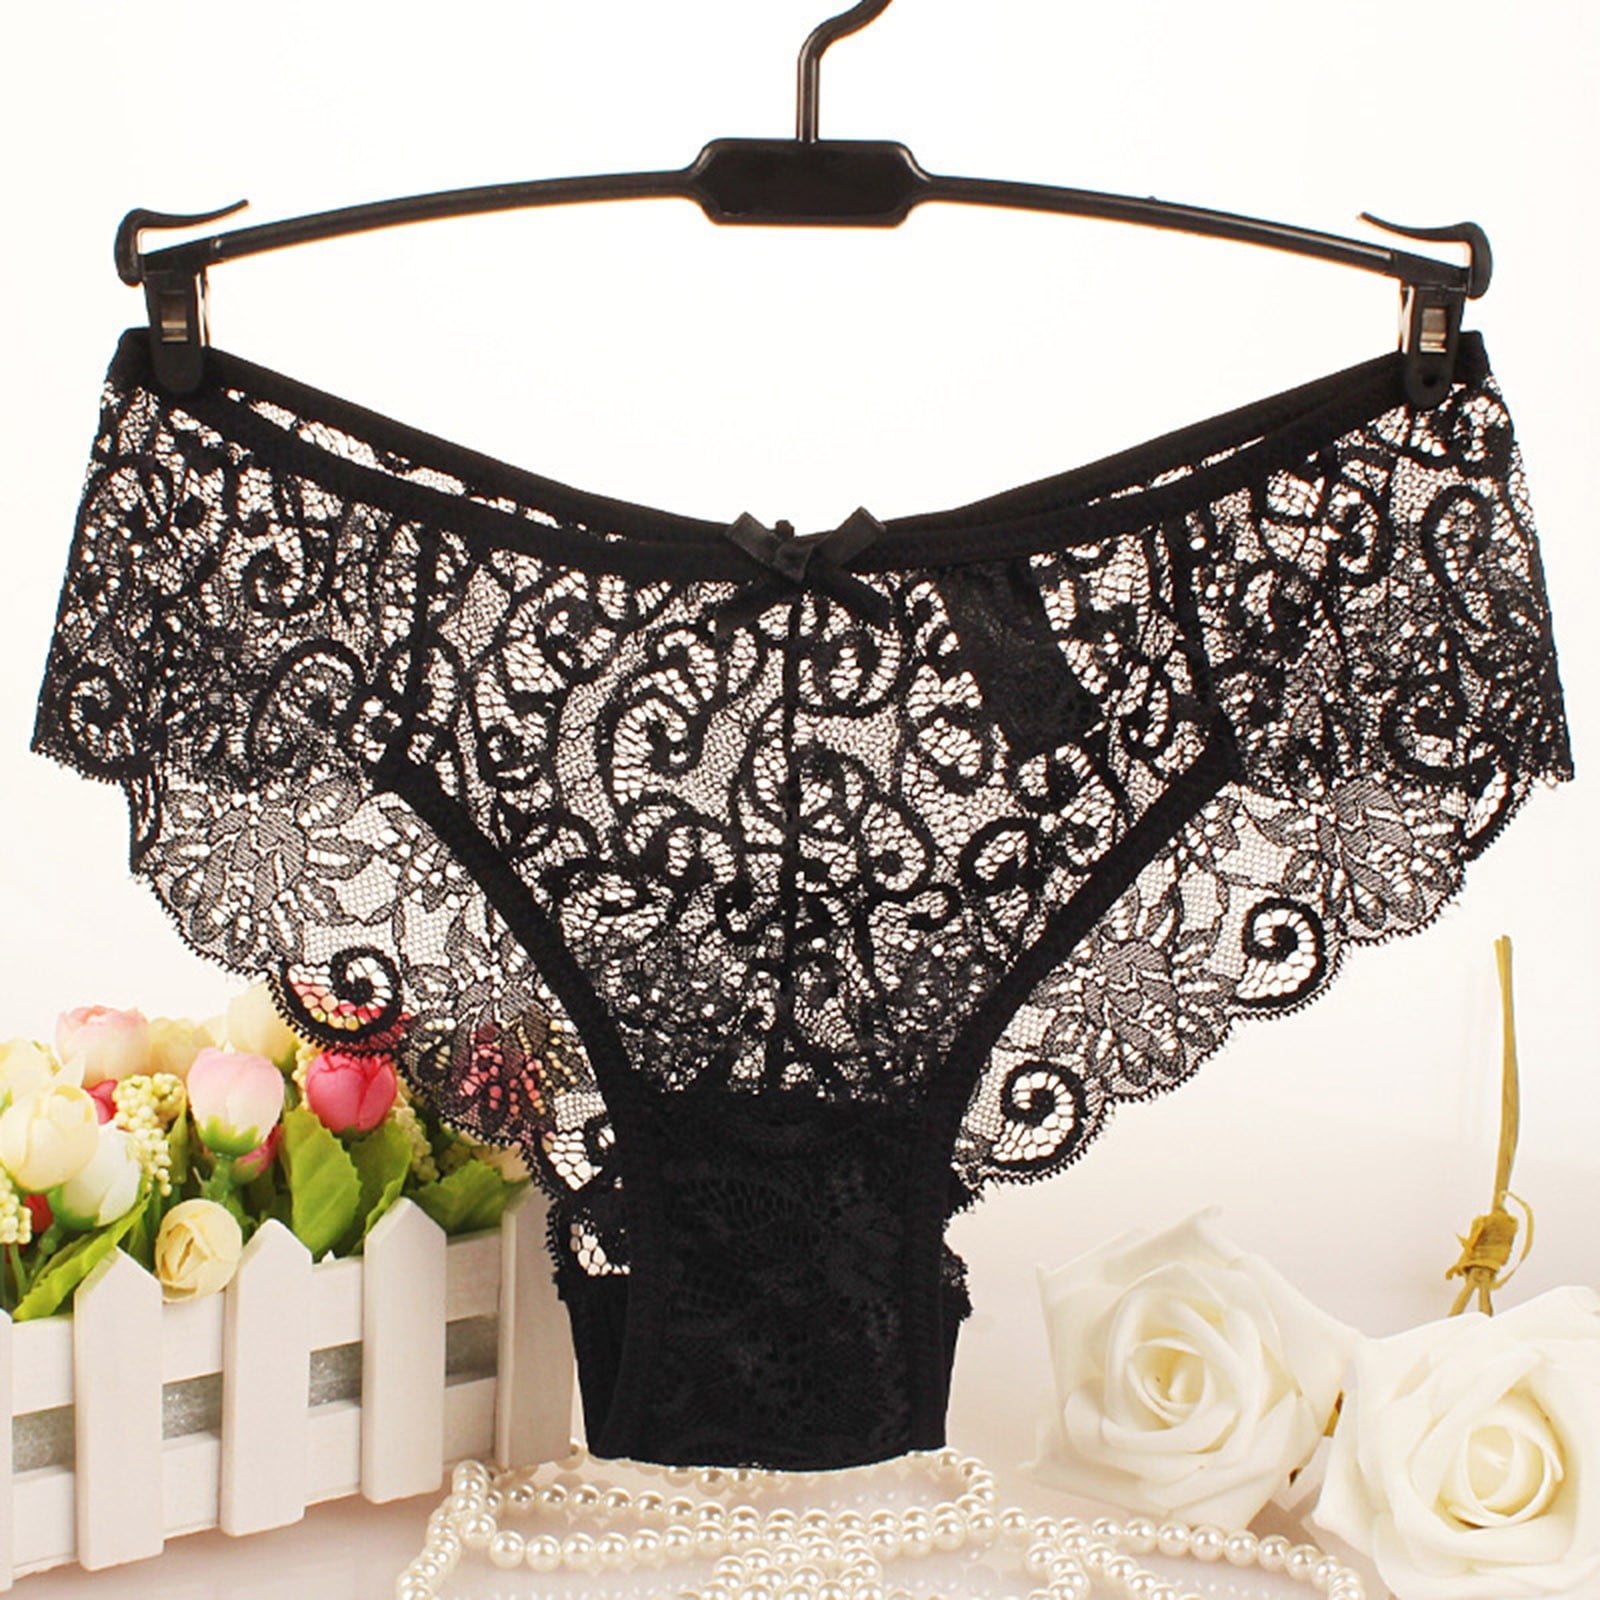 Cathalem French Cut Underwear for Women Women Panties Lace